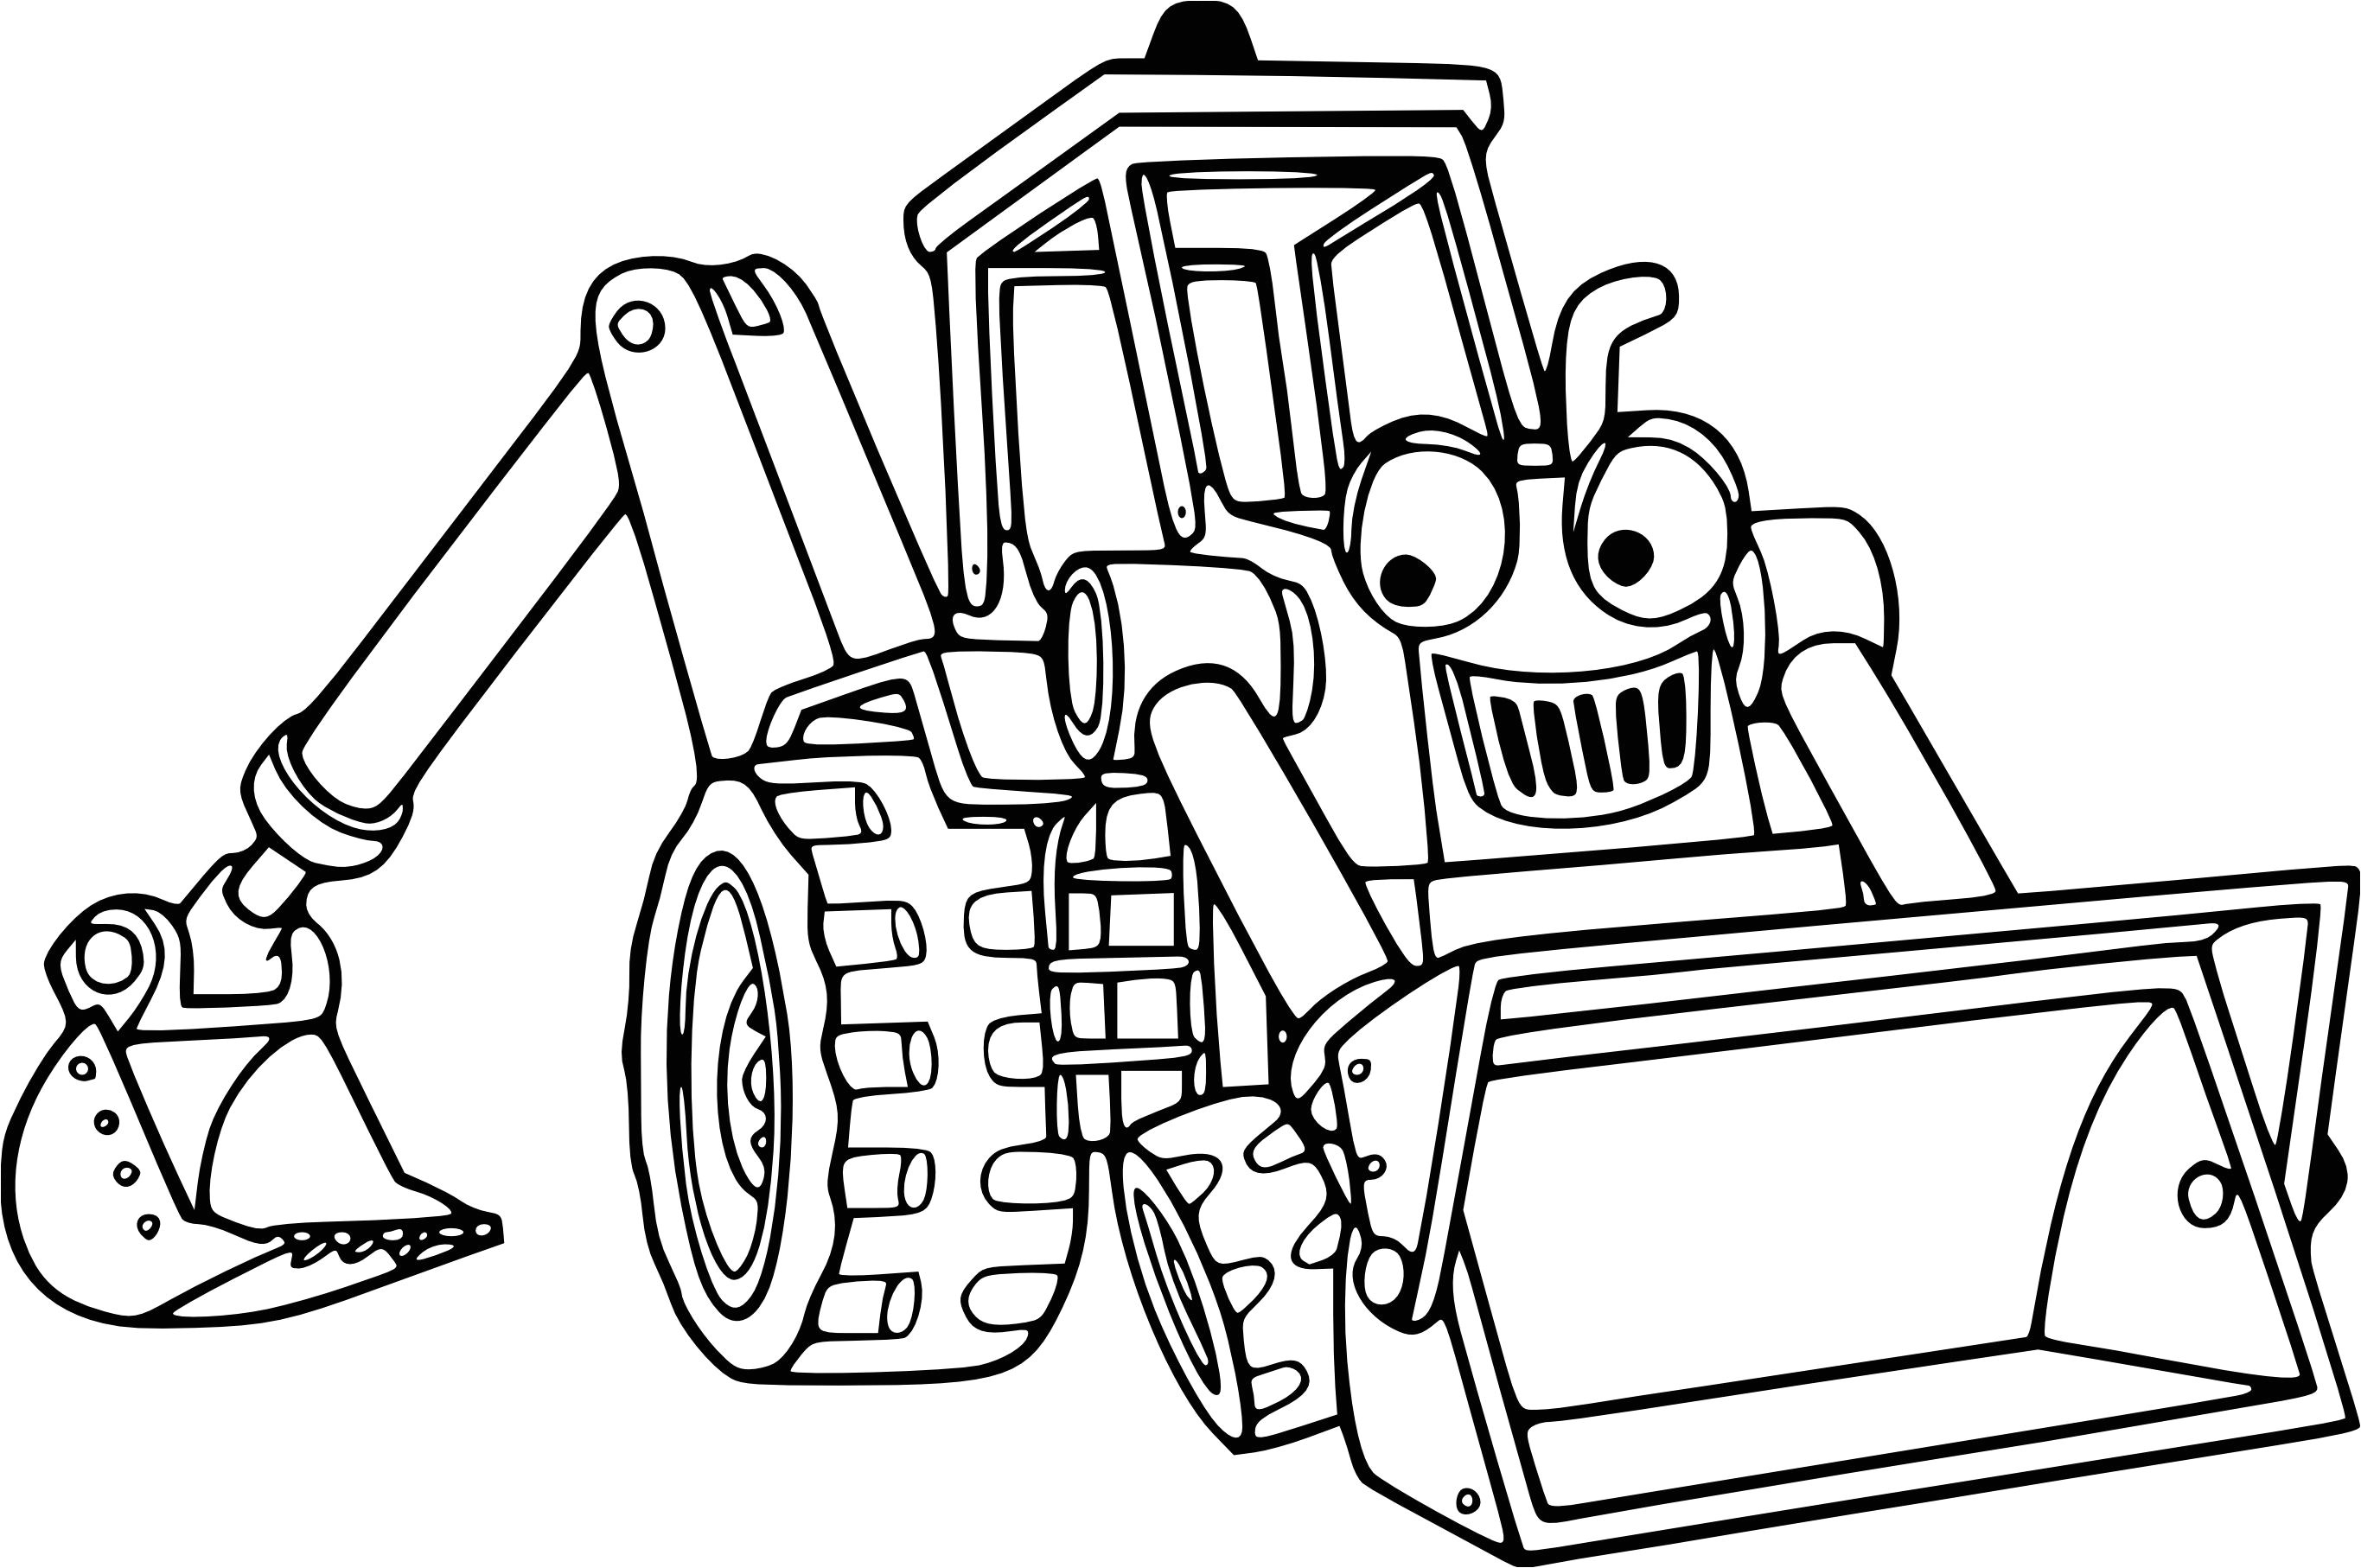 Dessin Coloriage Tractopelle Coloriage Tractopelle Imprimer Coloriage Tracteur Pelle Dessin De L